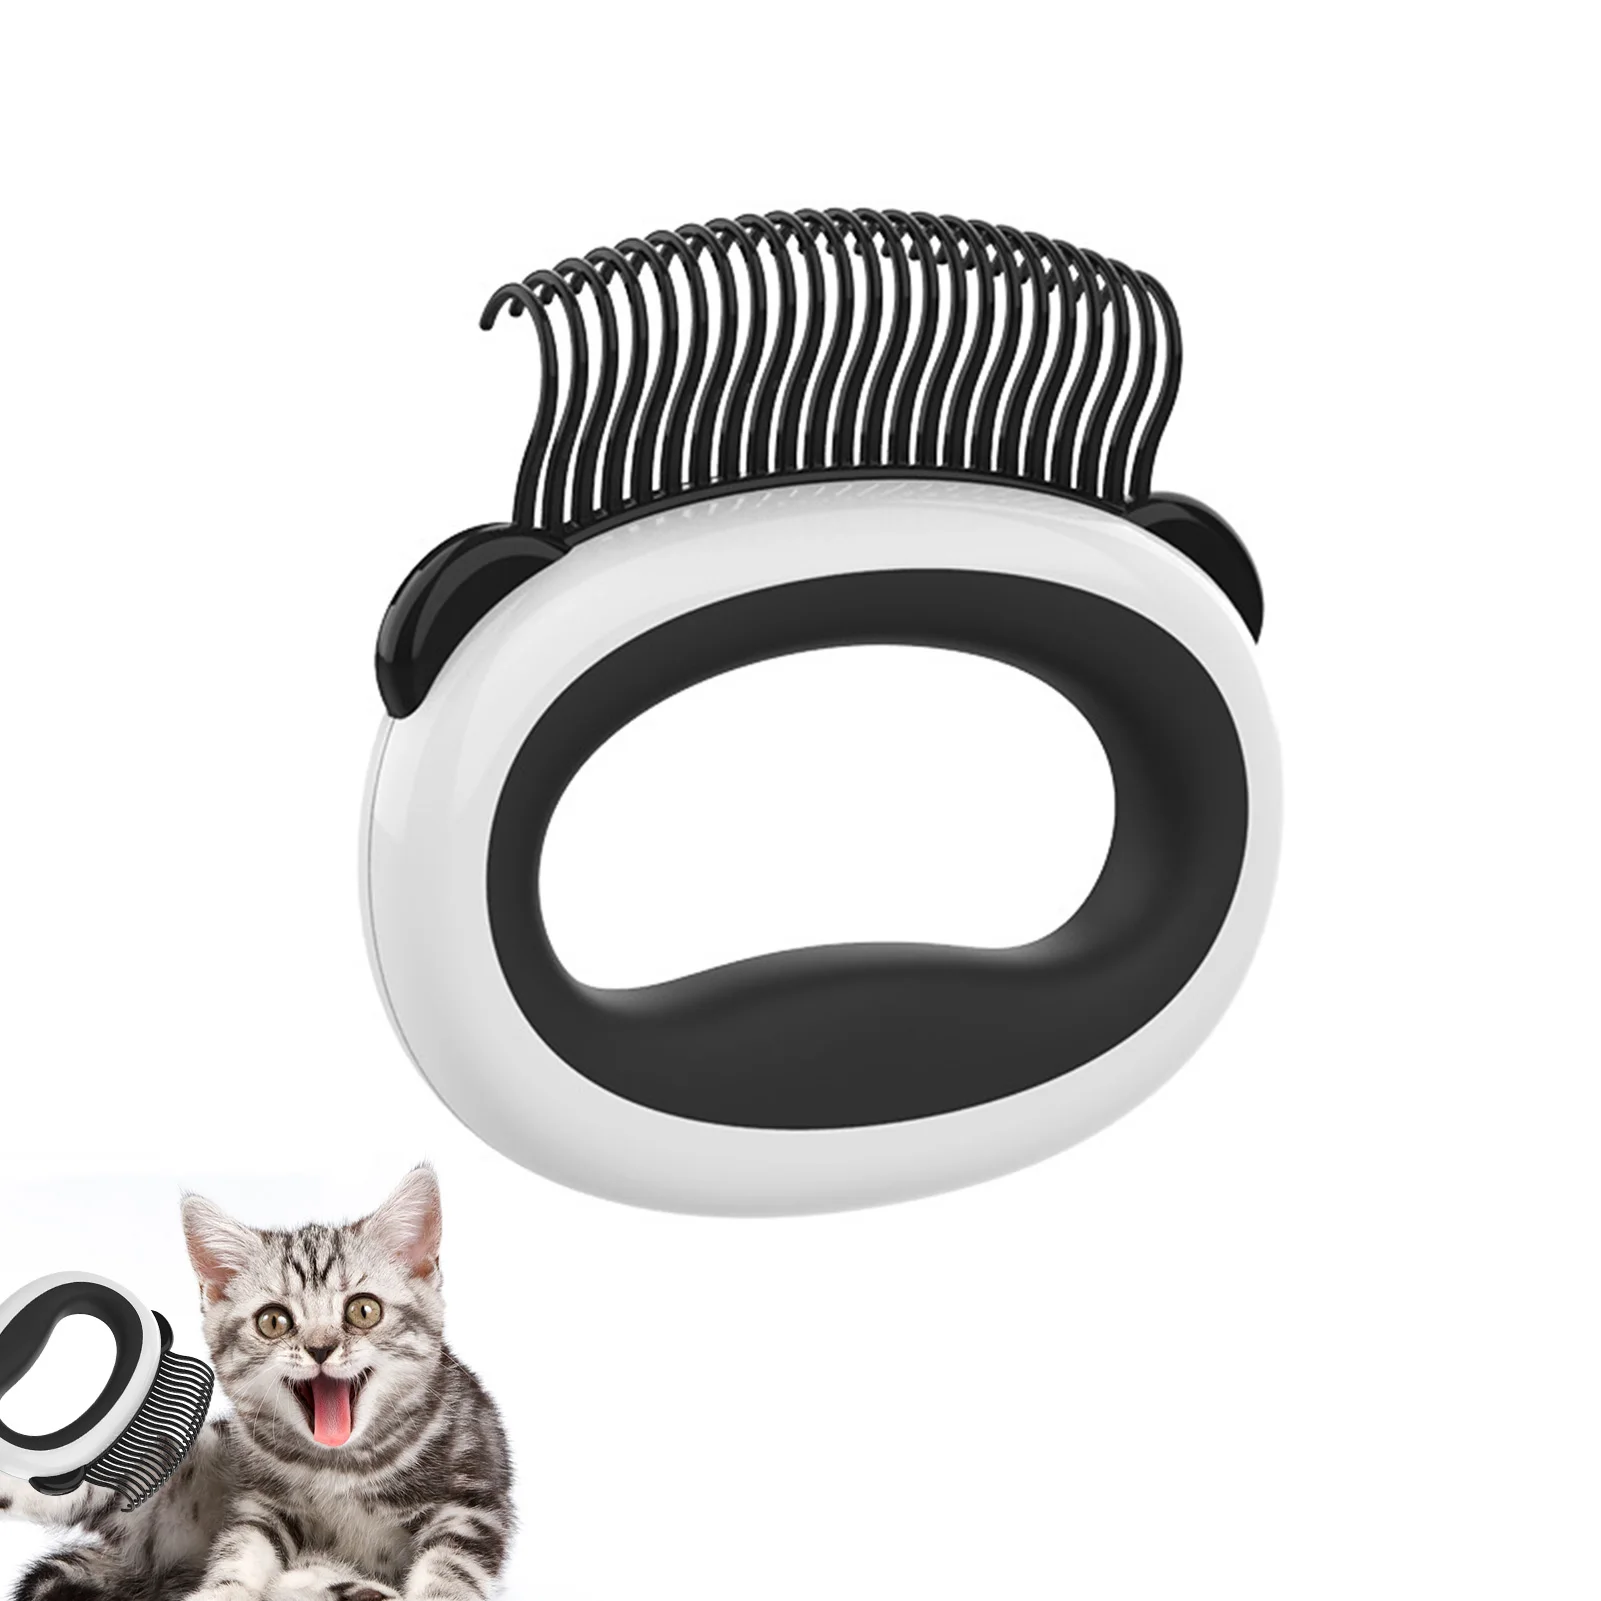 

Cat Hair Removal Comb Dog Cat Combs Hair Remover Brush Massaging Shell Comb Soft Deshedding Brush Grooming & Shedding Matted Fur